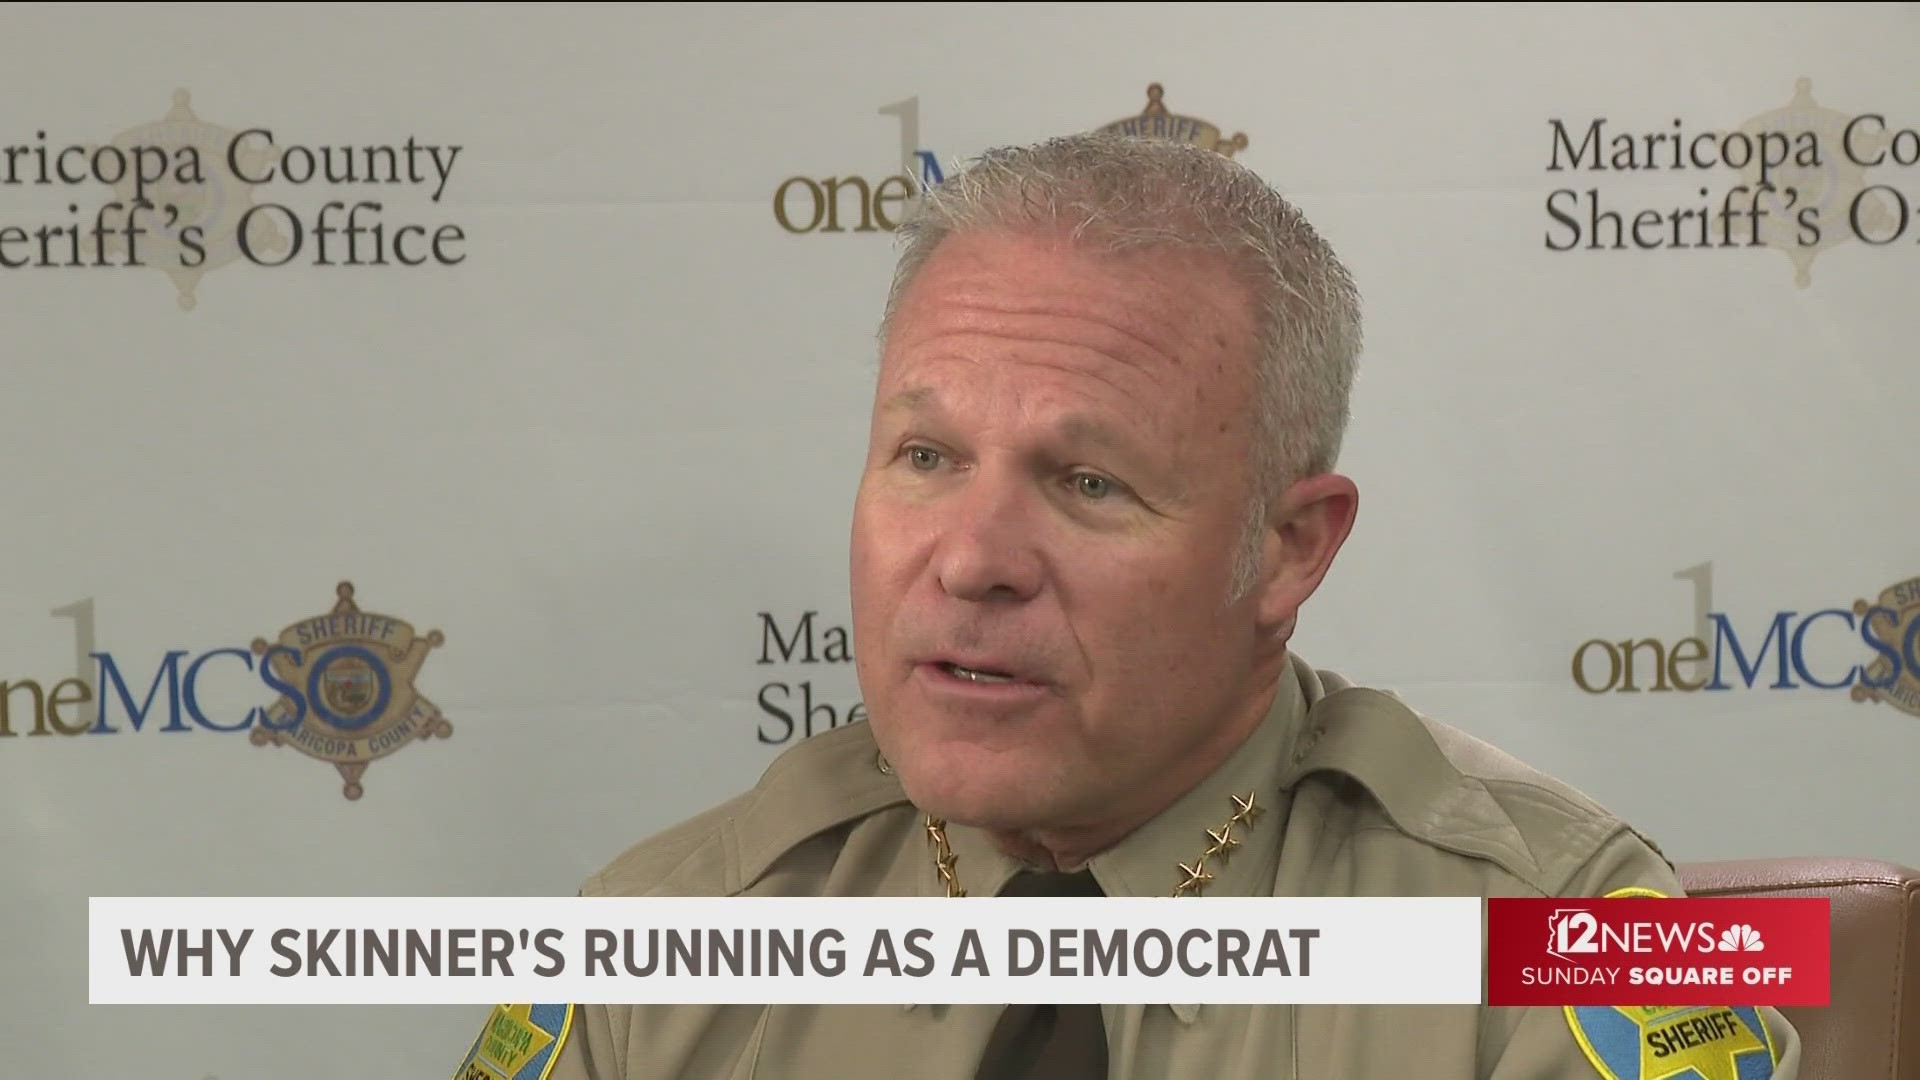 Sheriff Russ Skinner, the new top law enforcement officer in Maricopa County, shares his views on Sunday Square Off.